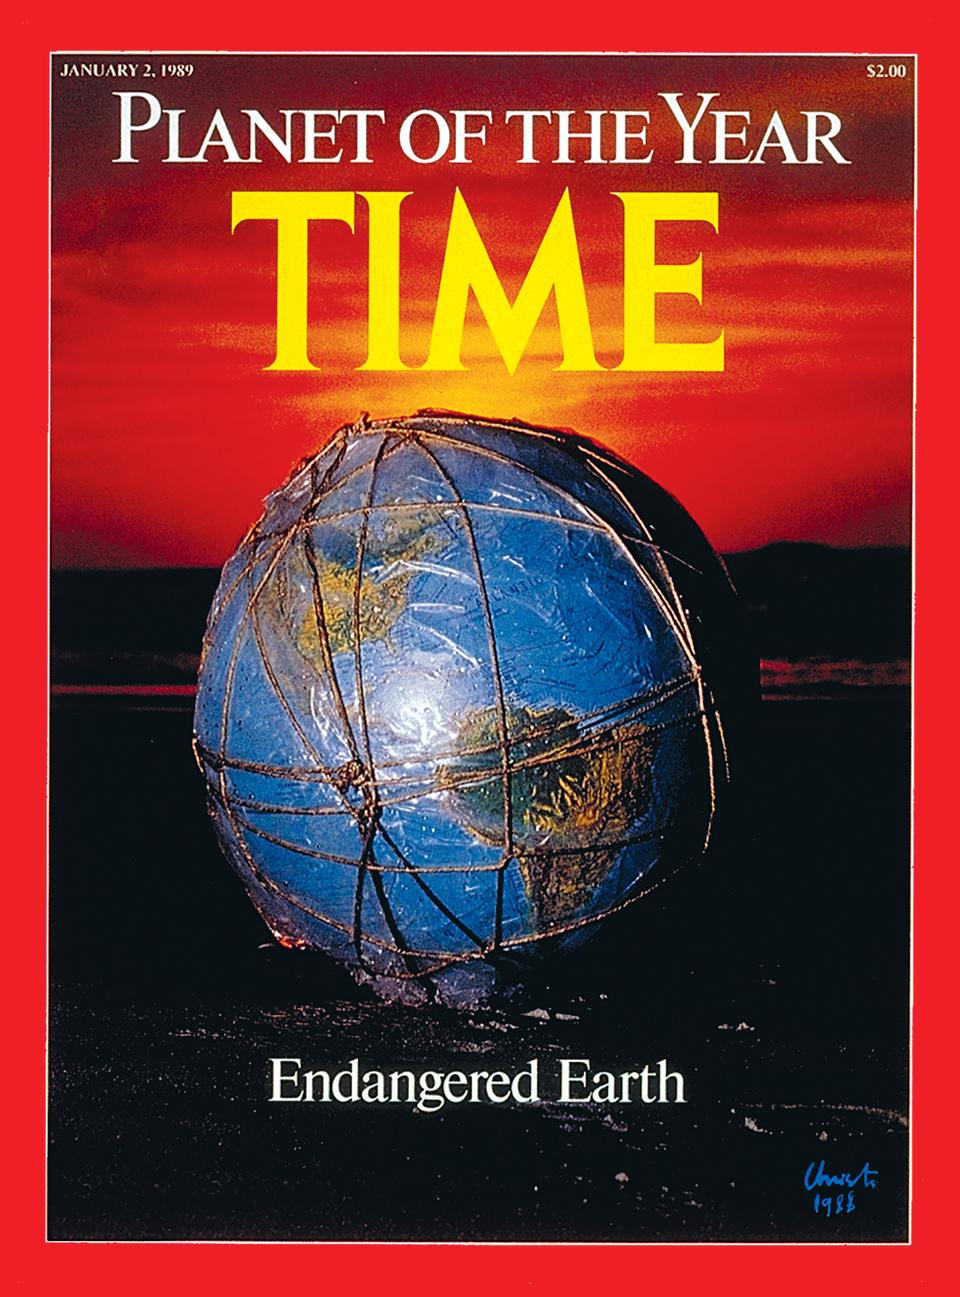 Endangered Earth, Planet of the Year, Jan. 2, 1989 cover